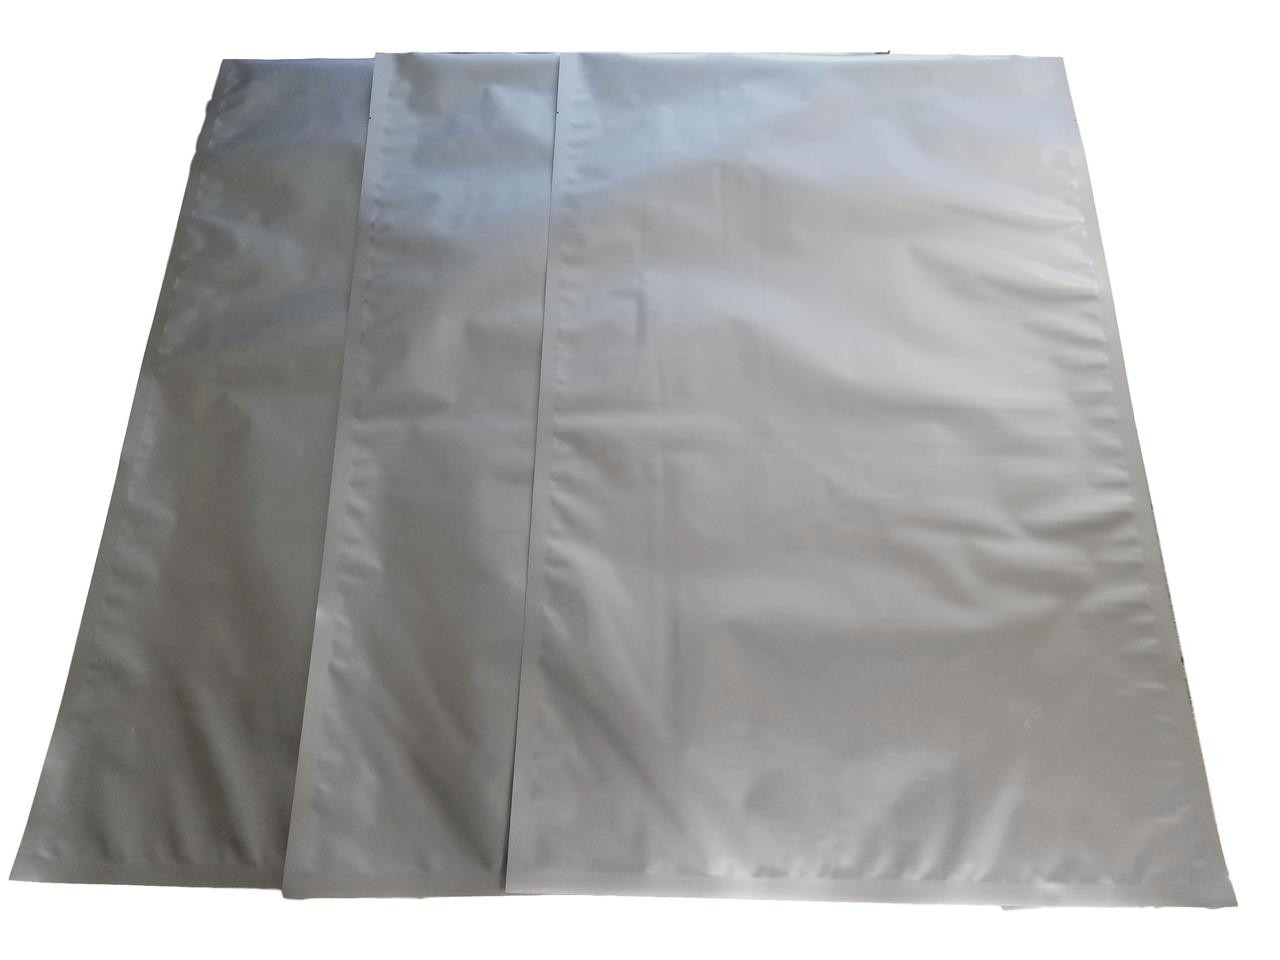 10 x Resealable 5 Gallon Mylar Bags – Grain Storage – on sale for $19.99,  $2 each + free prime ship